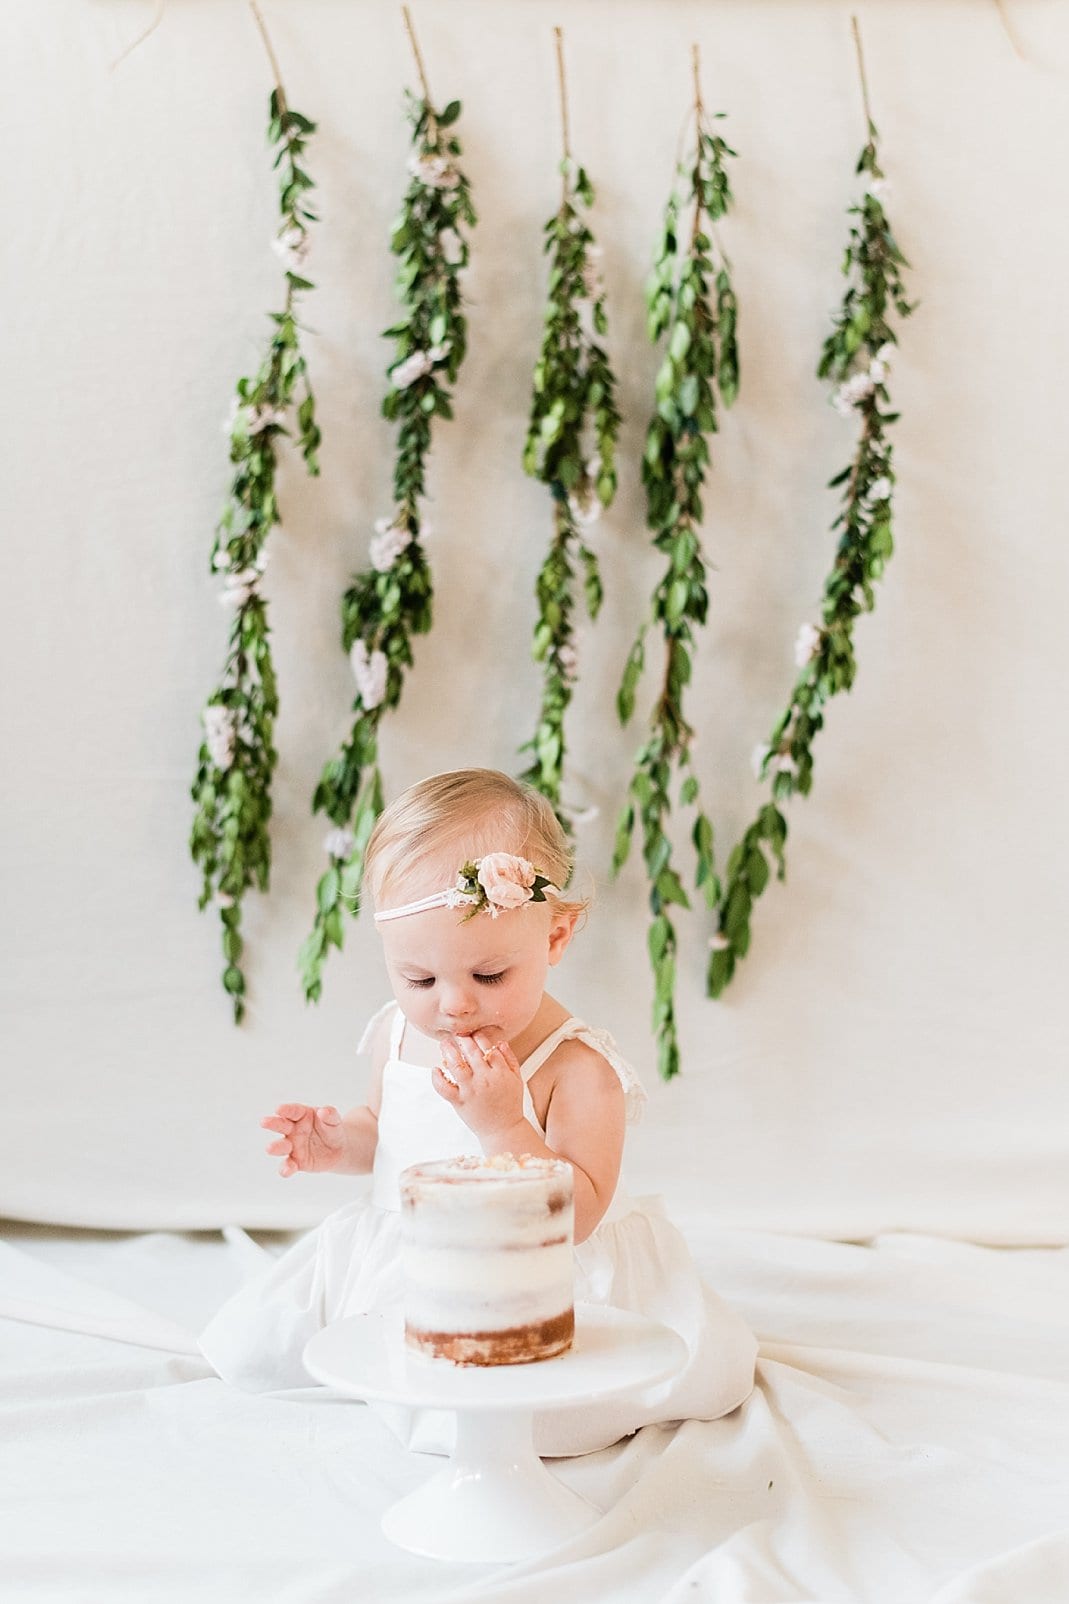 Wake Forest 1 year old doing an indoor cake smash in front of greenery backdrop photo